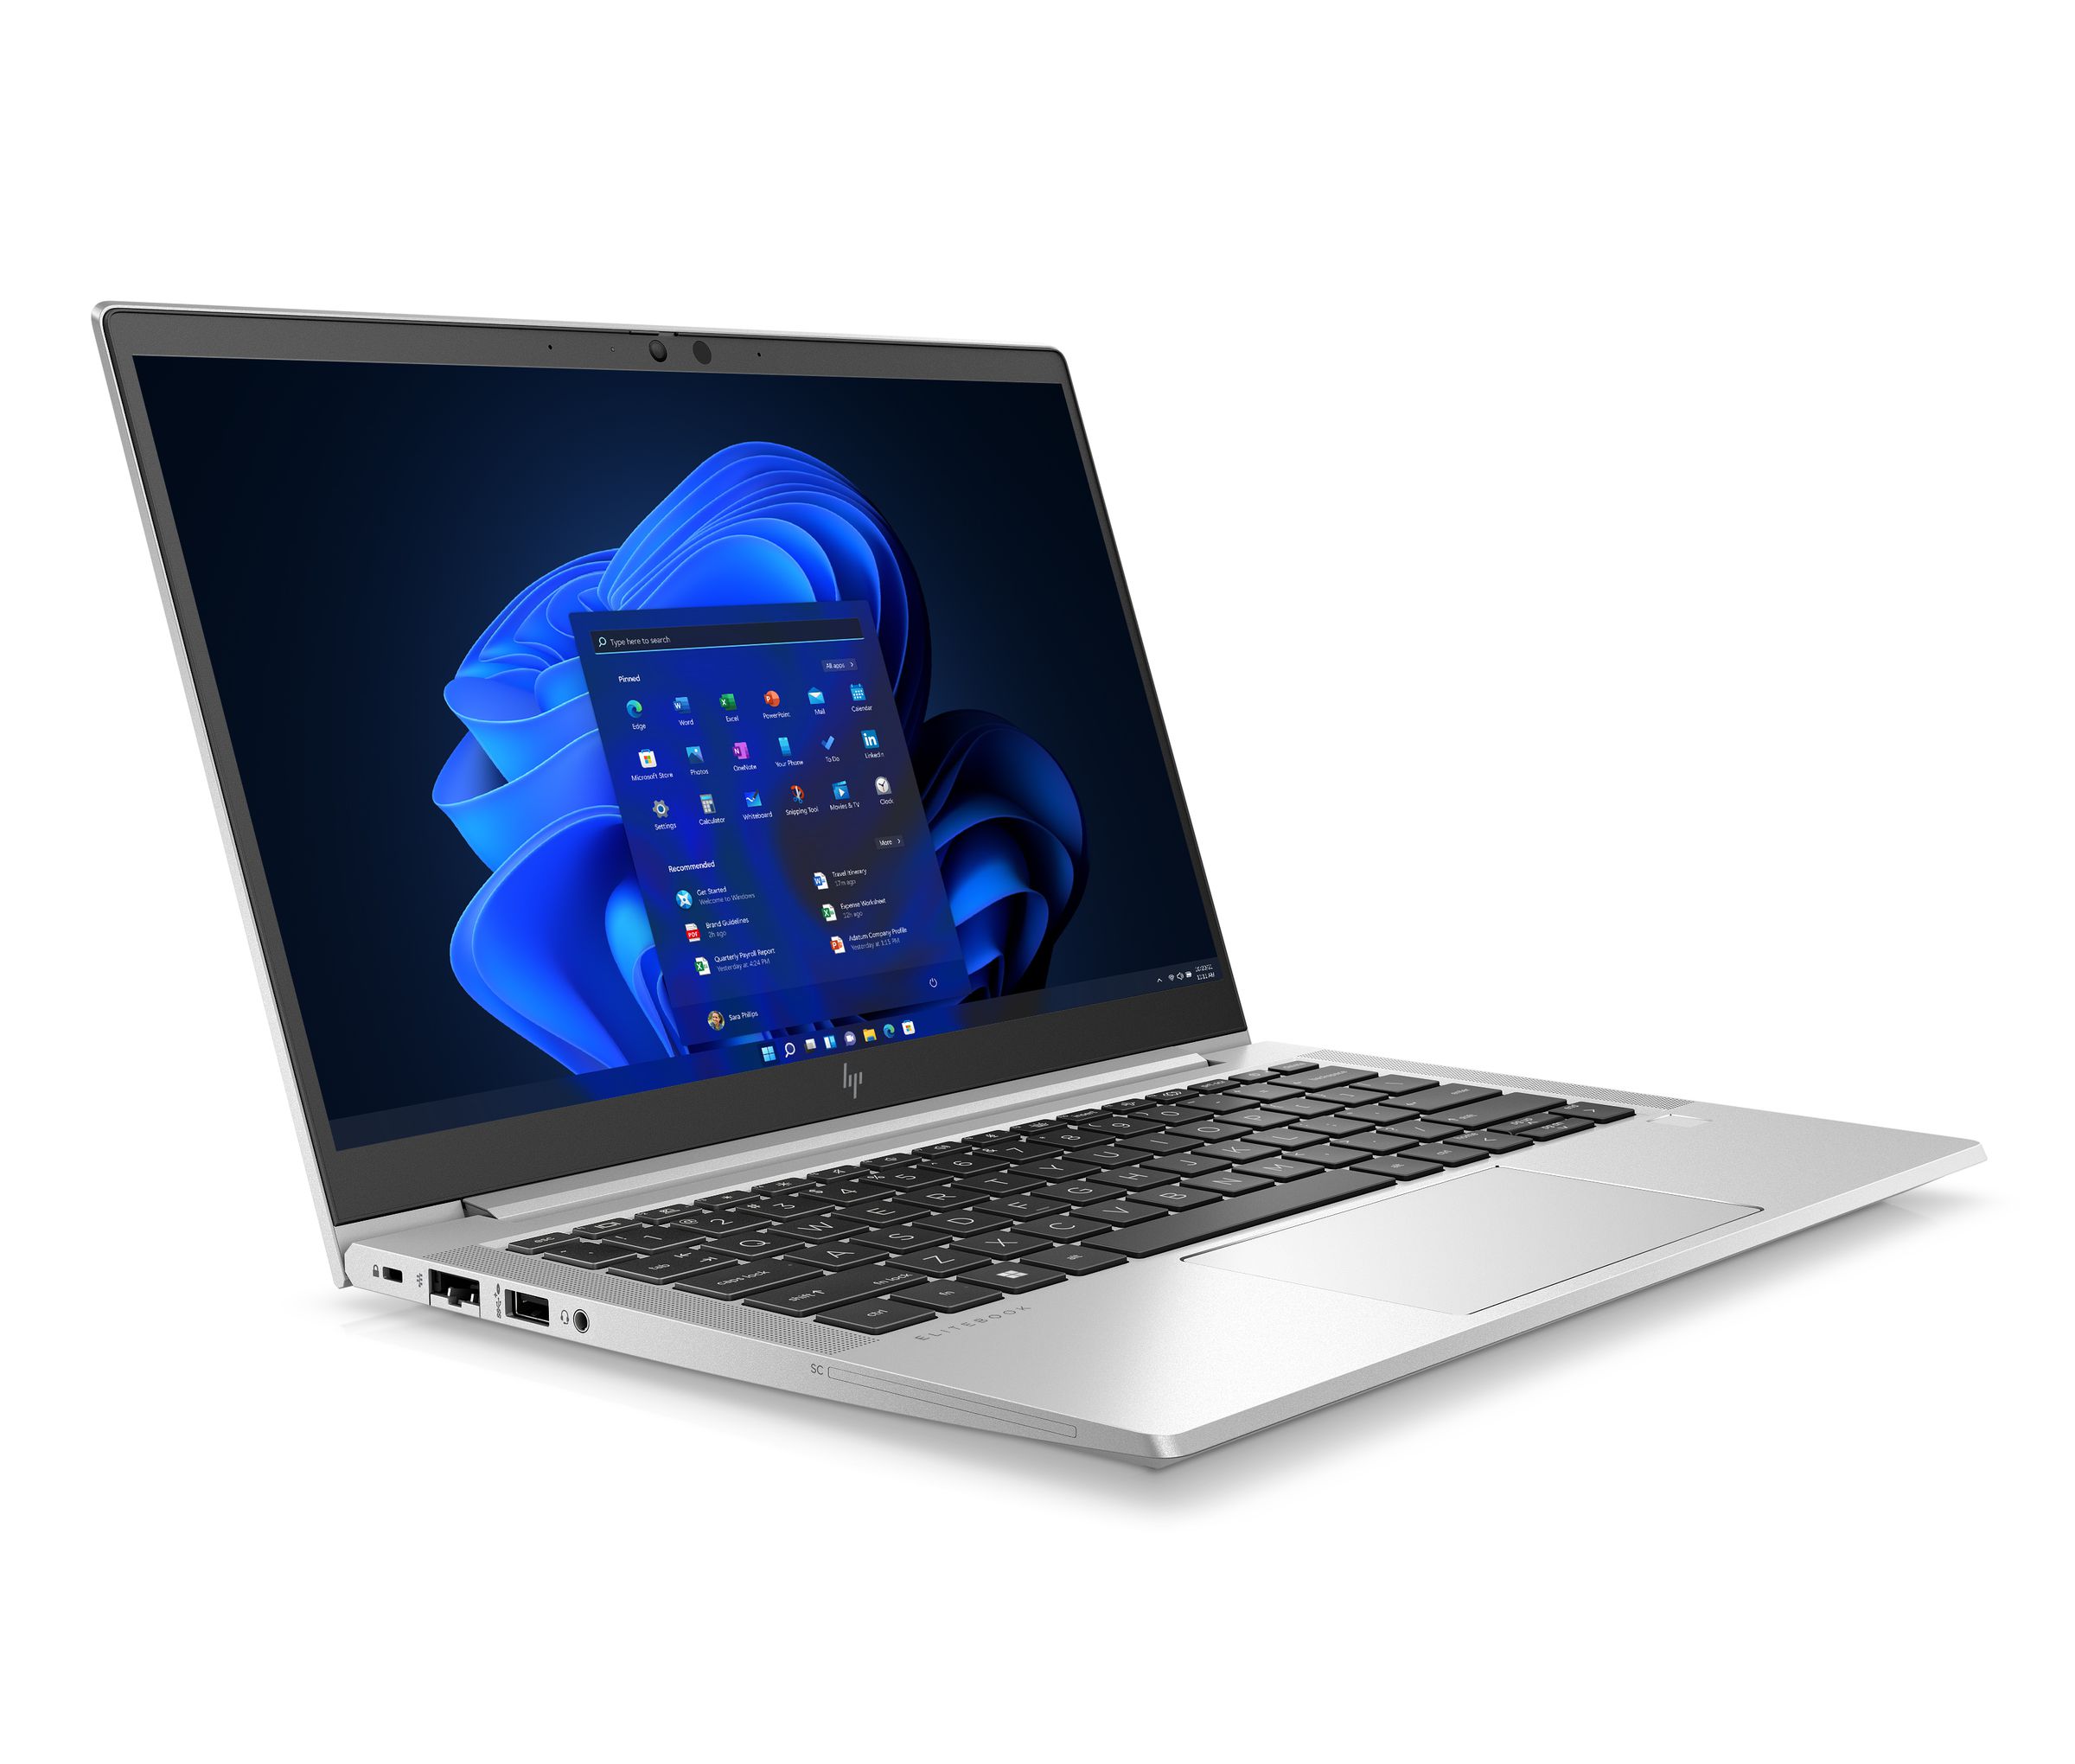 The EliteBook 630 G9 laptop has a 13.3-inch display.